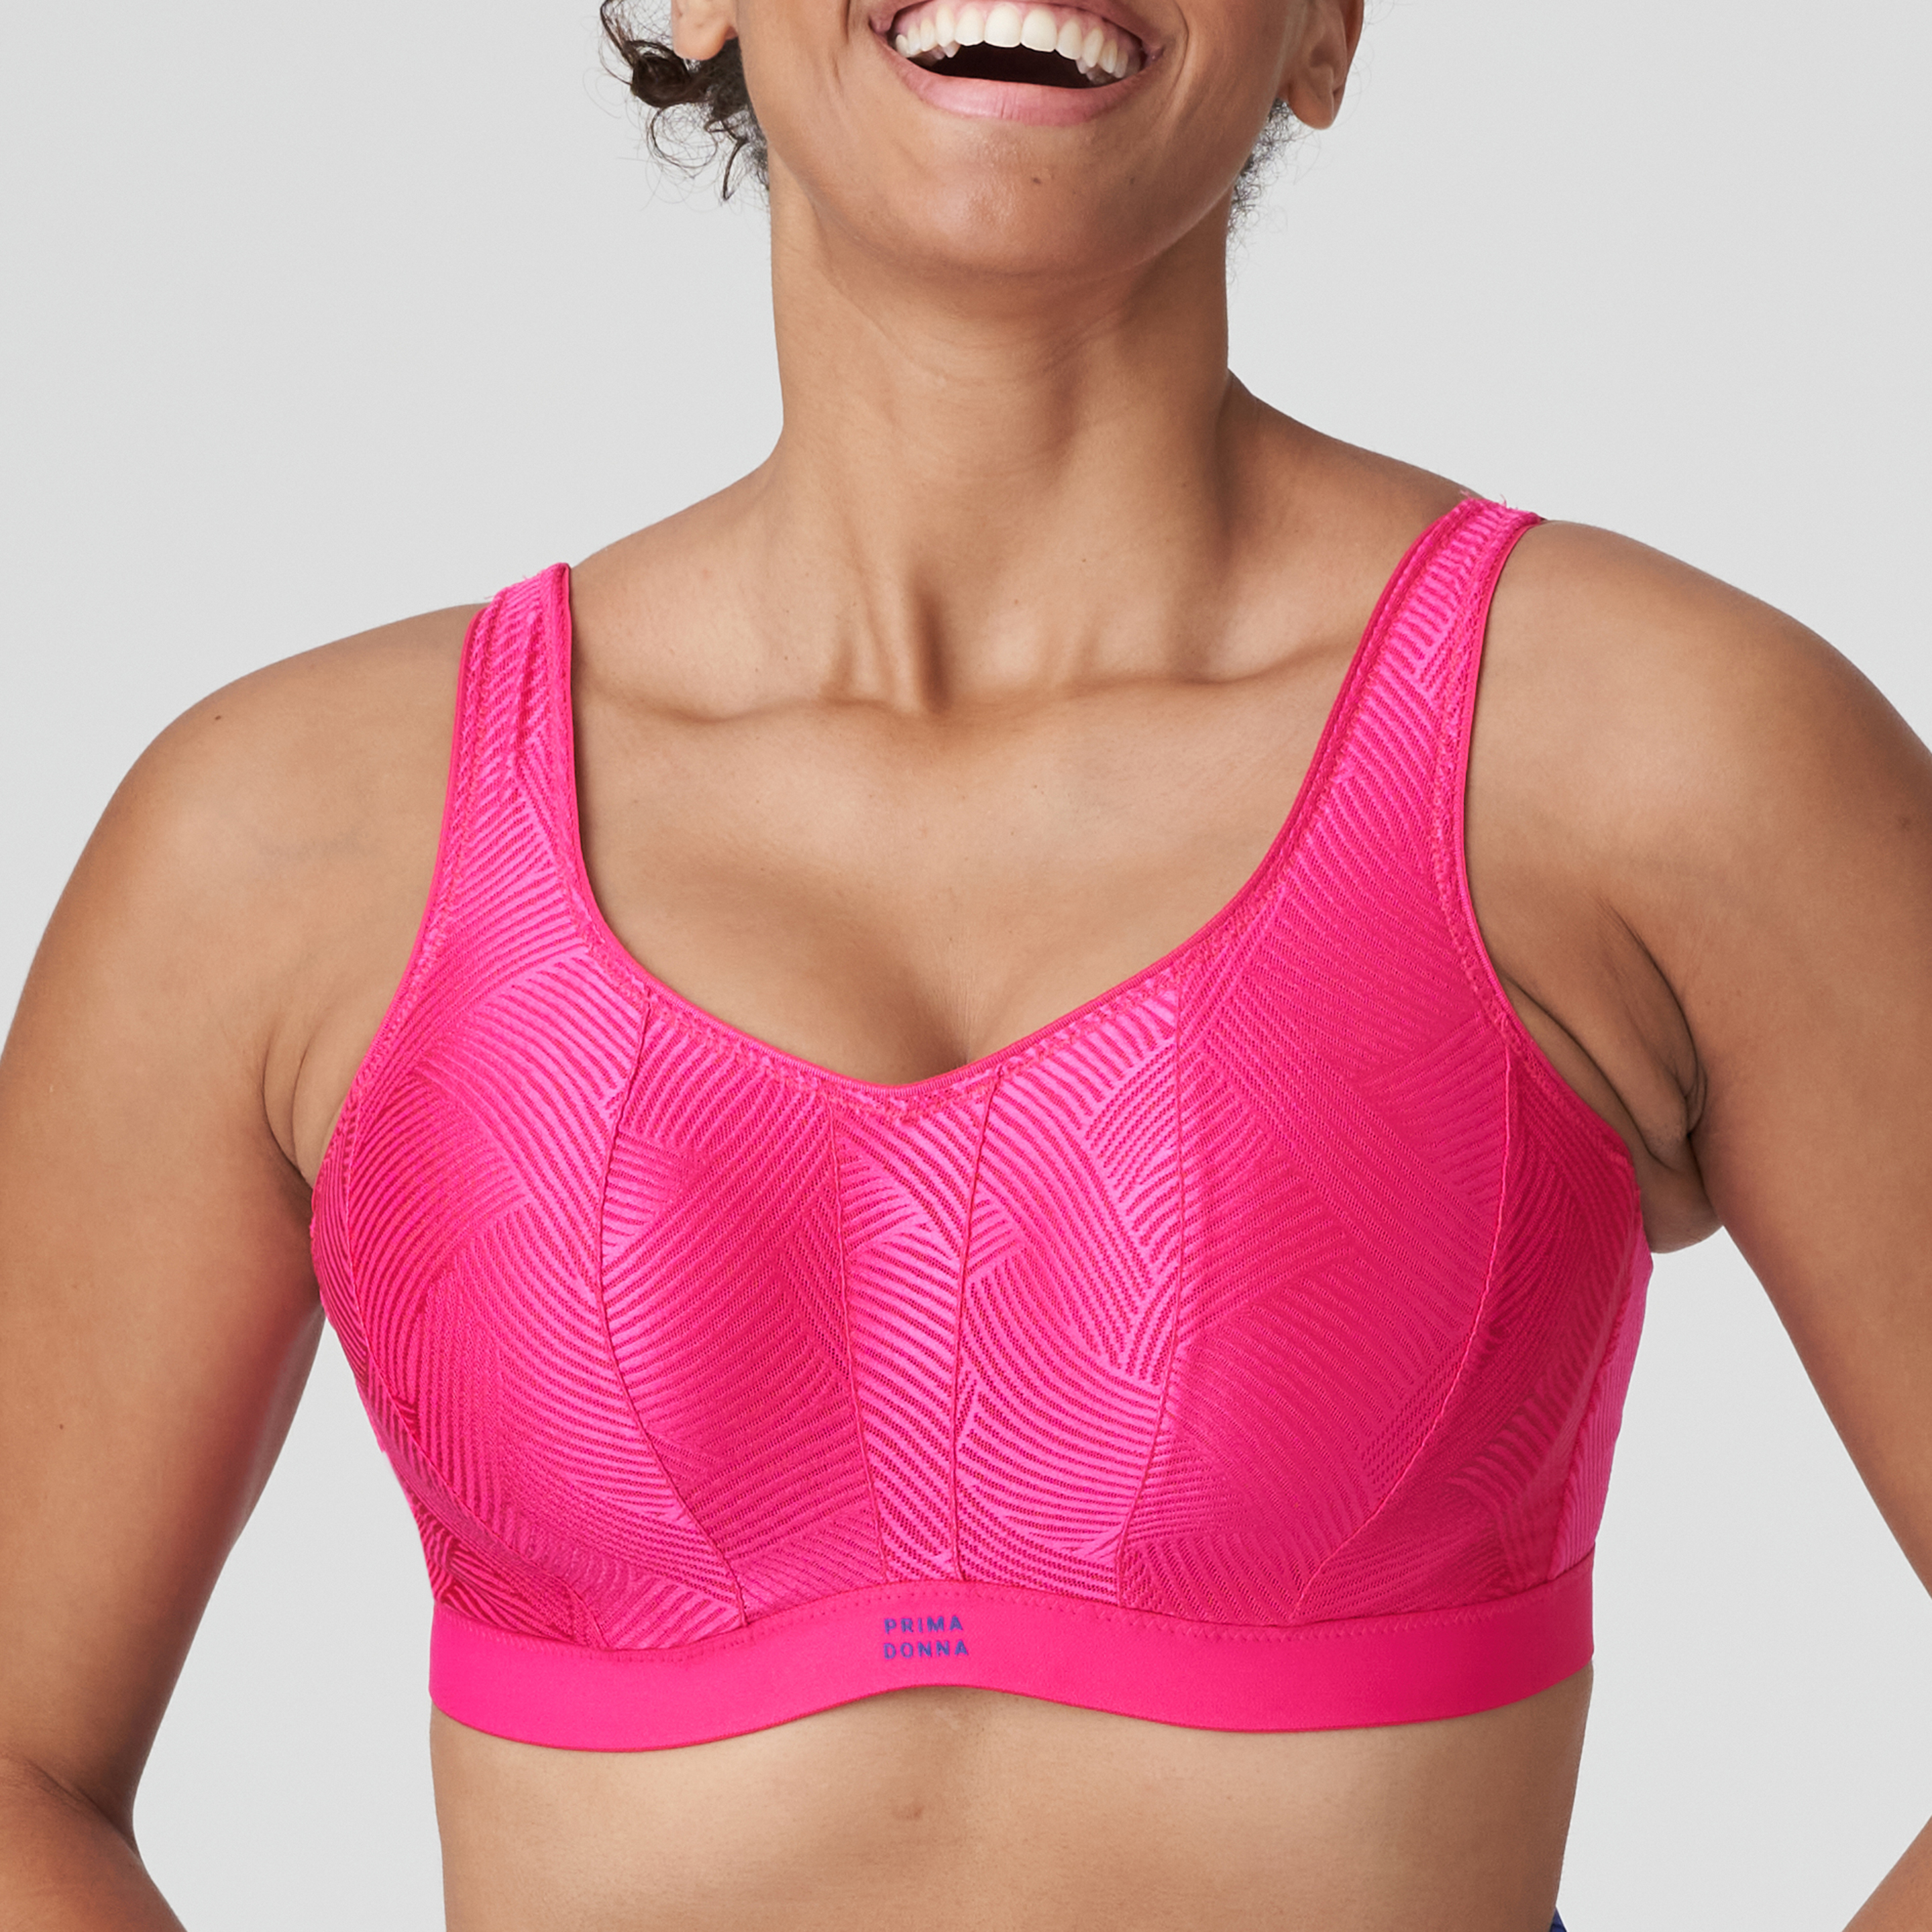 Prime Day Deal: Get a Sports Bra With 22,400+ 5-Star Reviews For $15